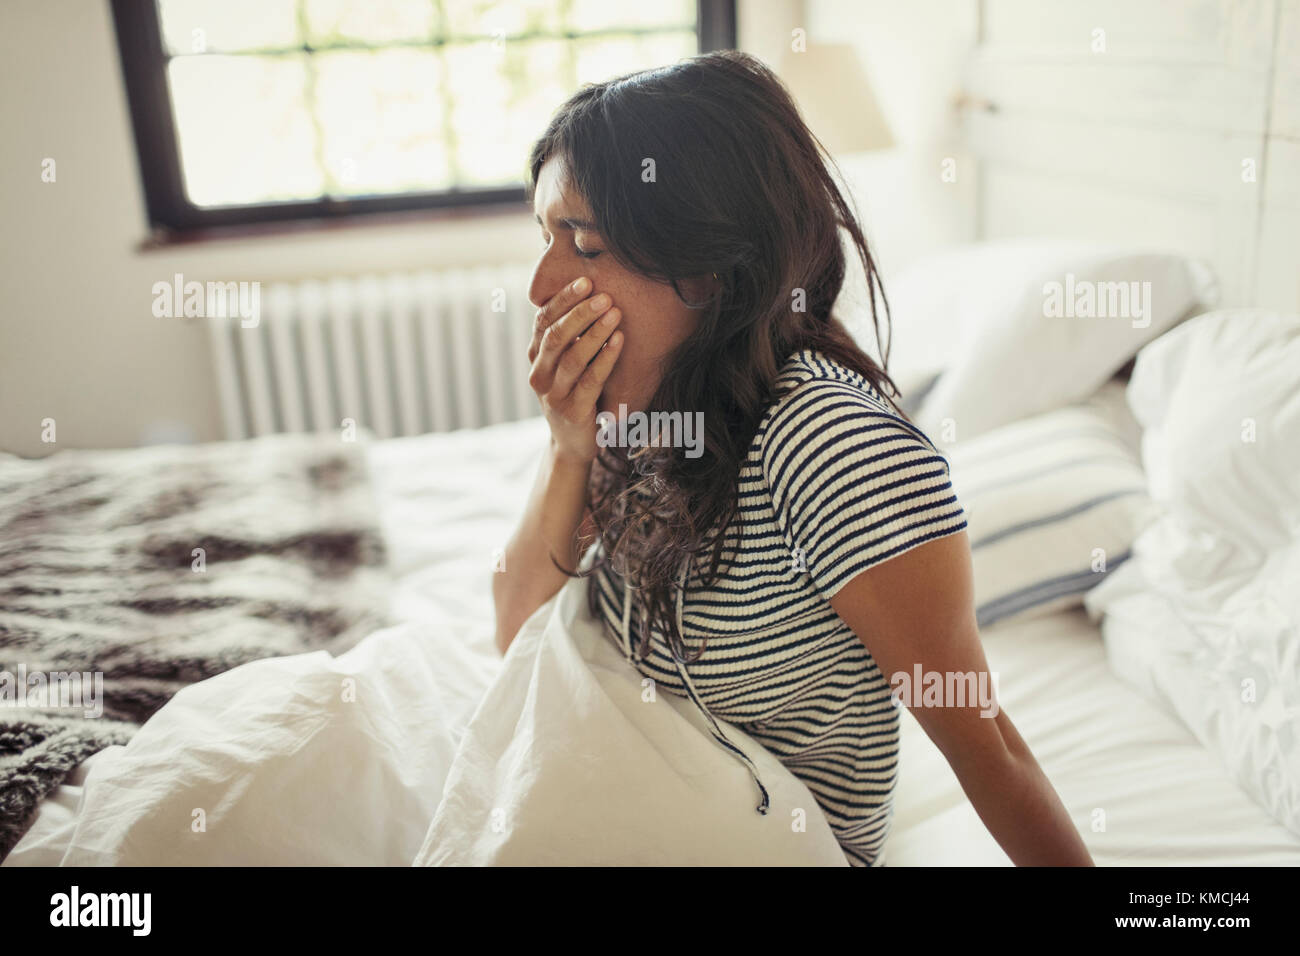 Tired young woman yawning in bed Stock Photo